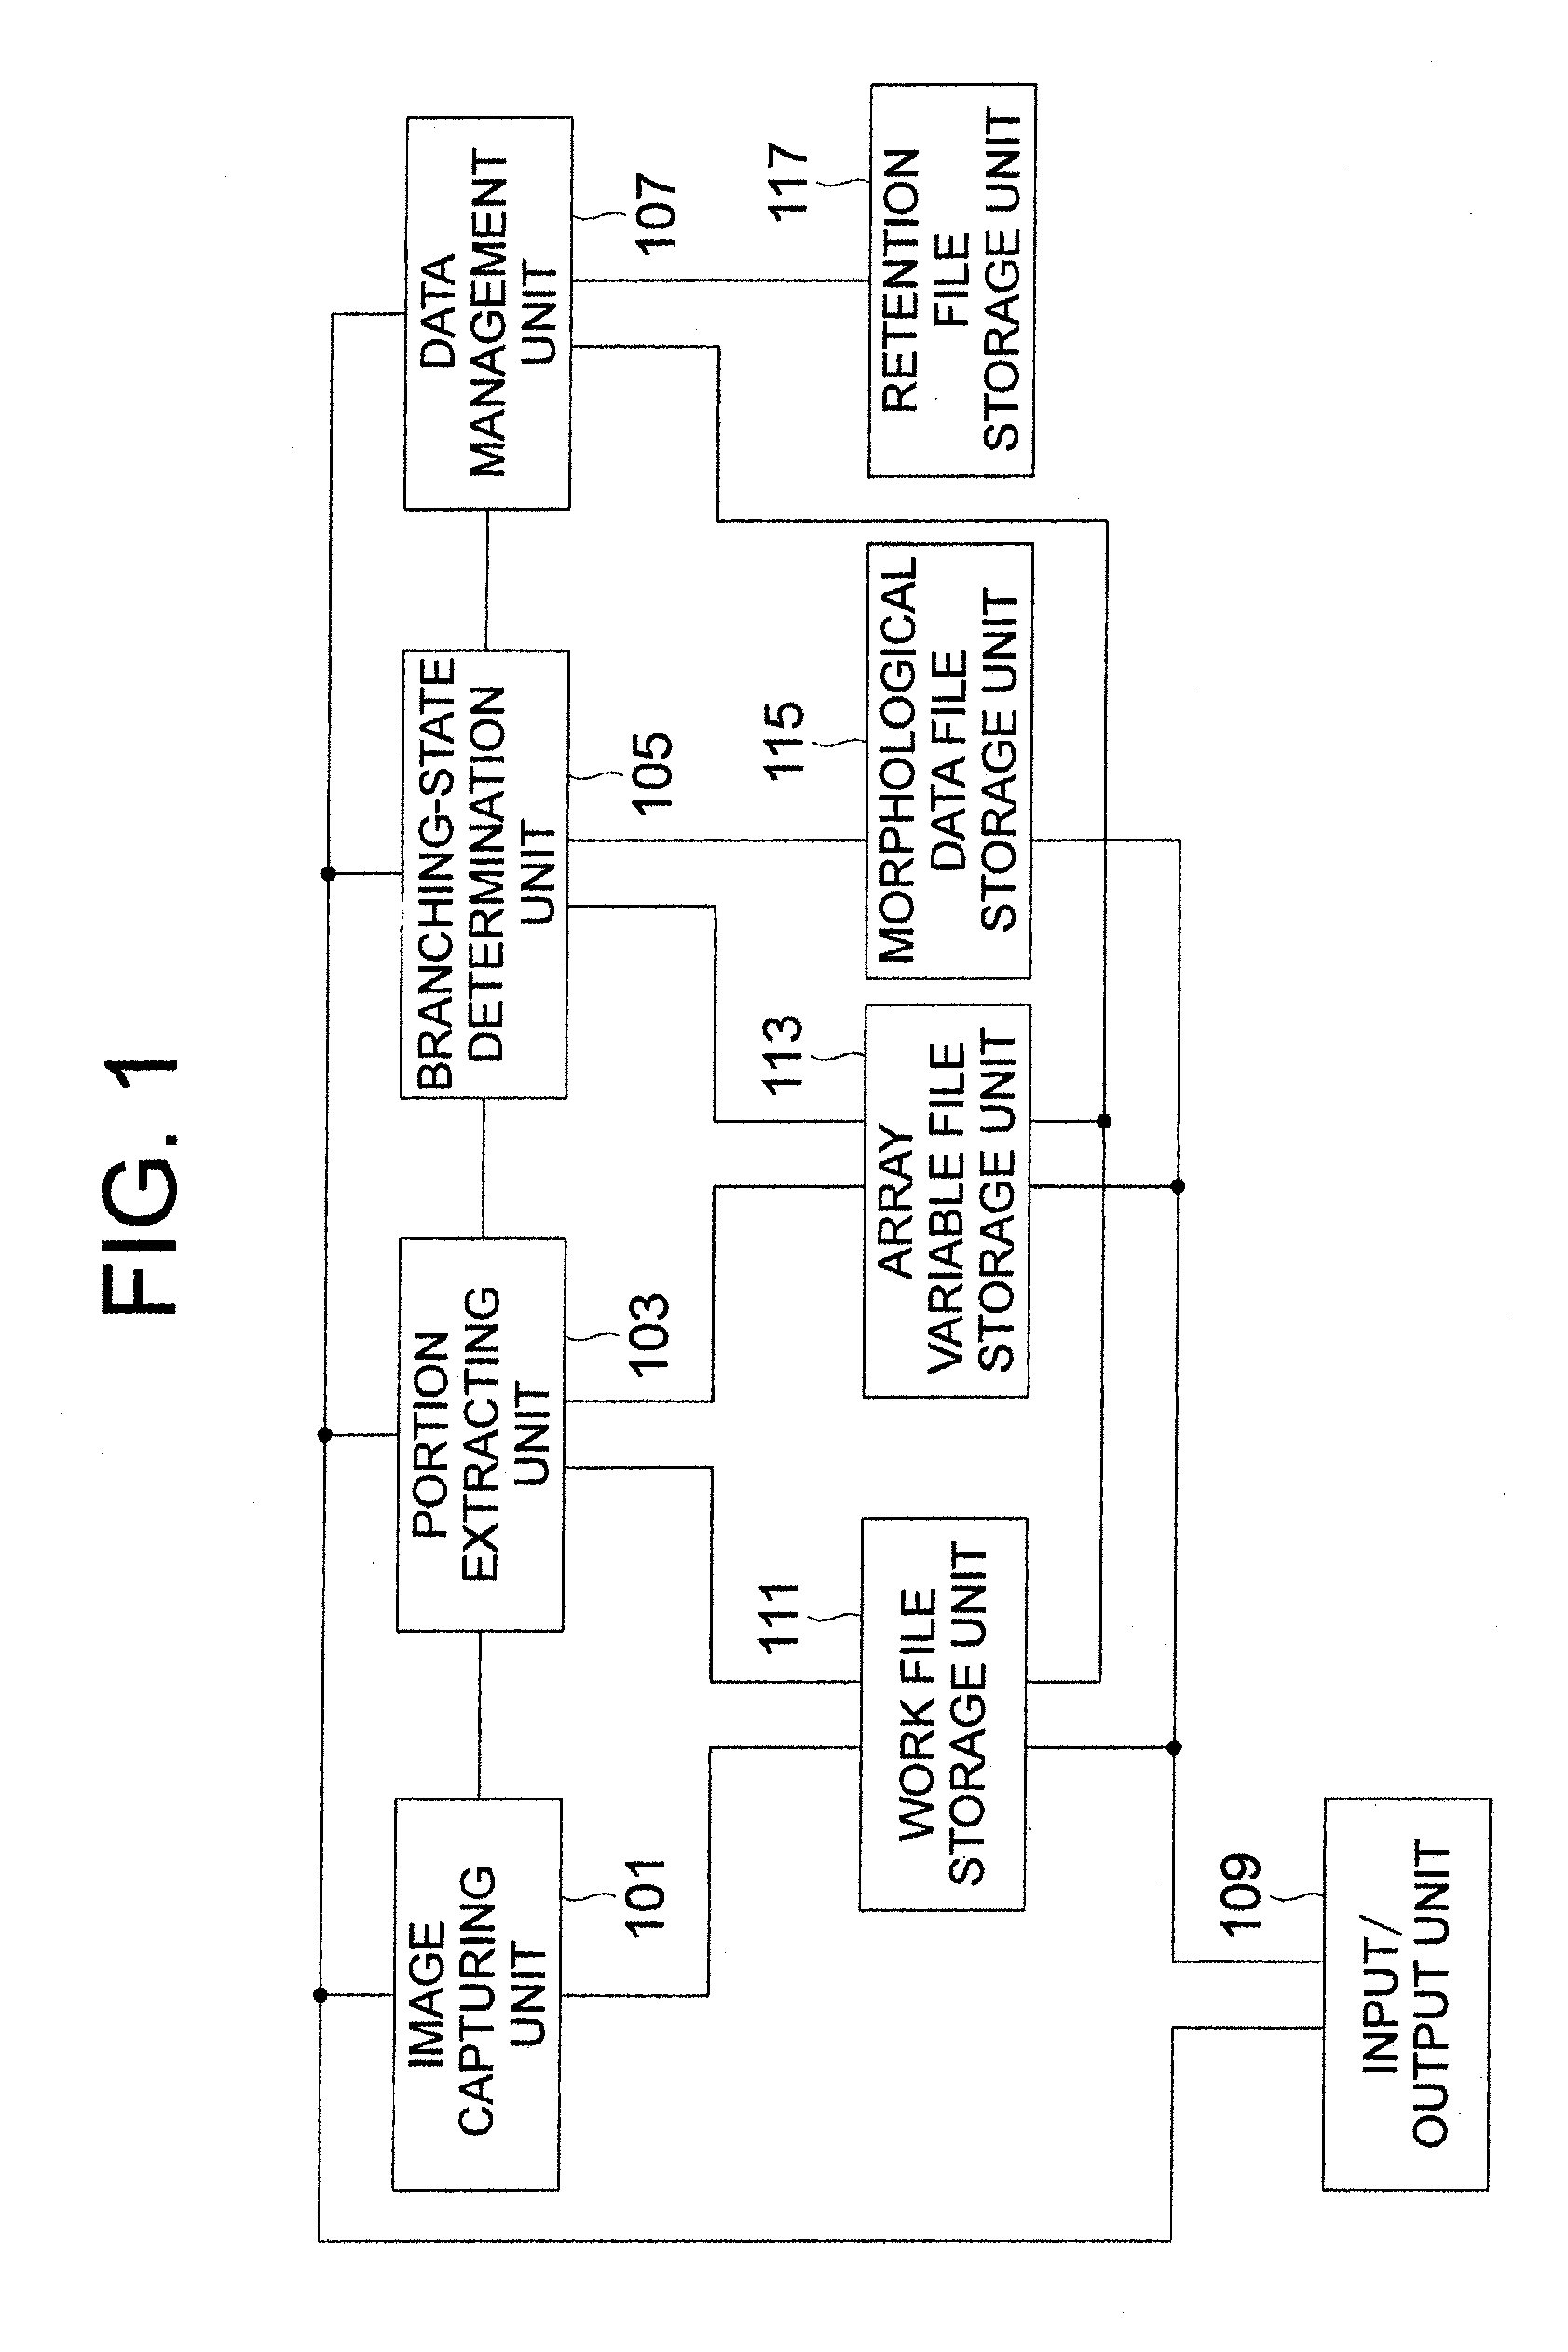 Method and apparatus for analyzing panicle structure